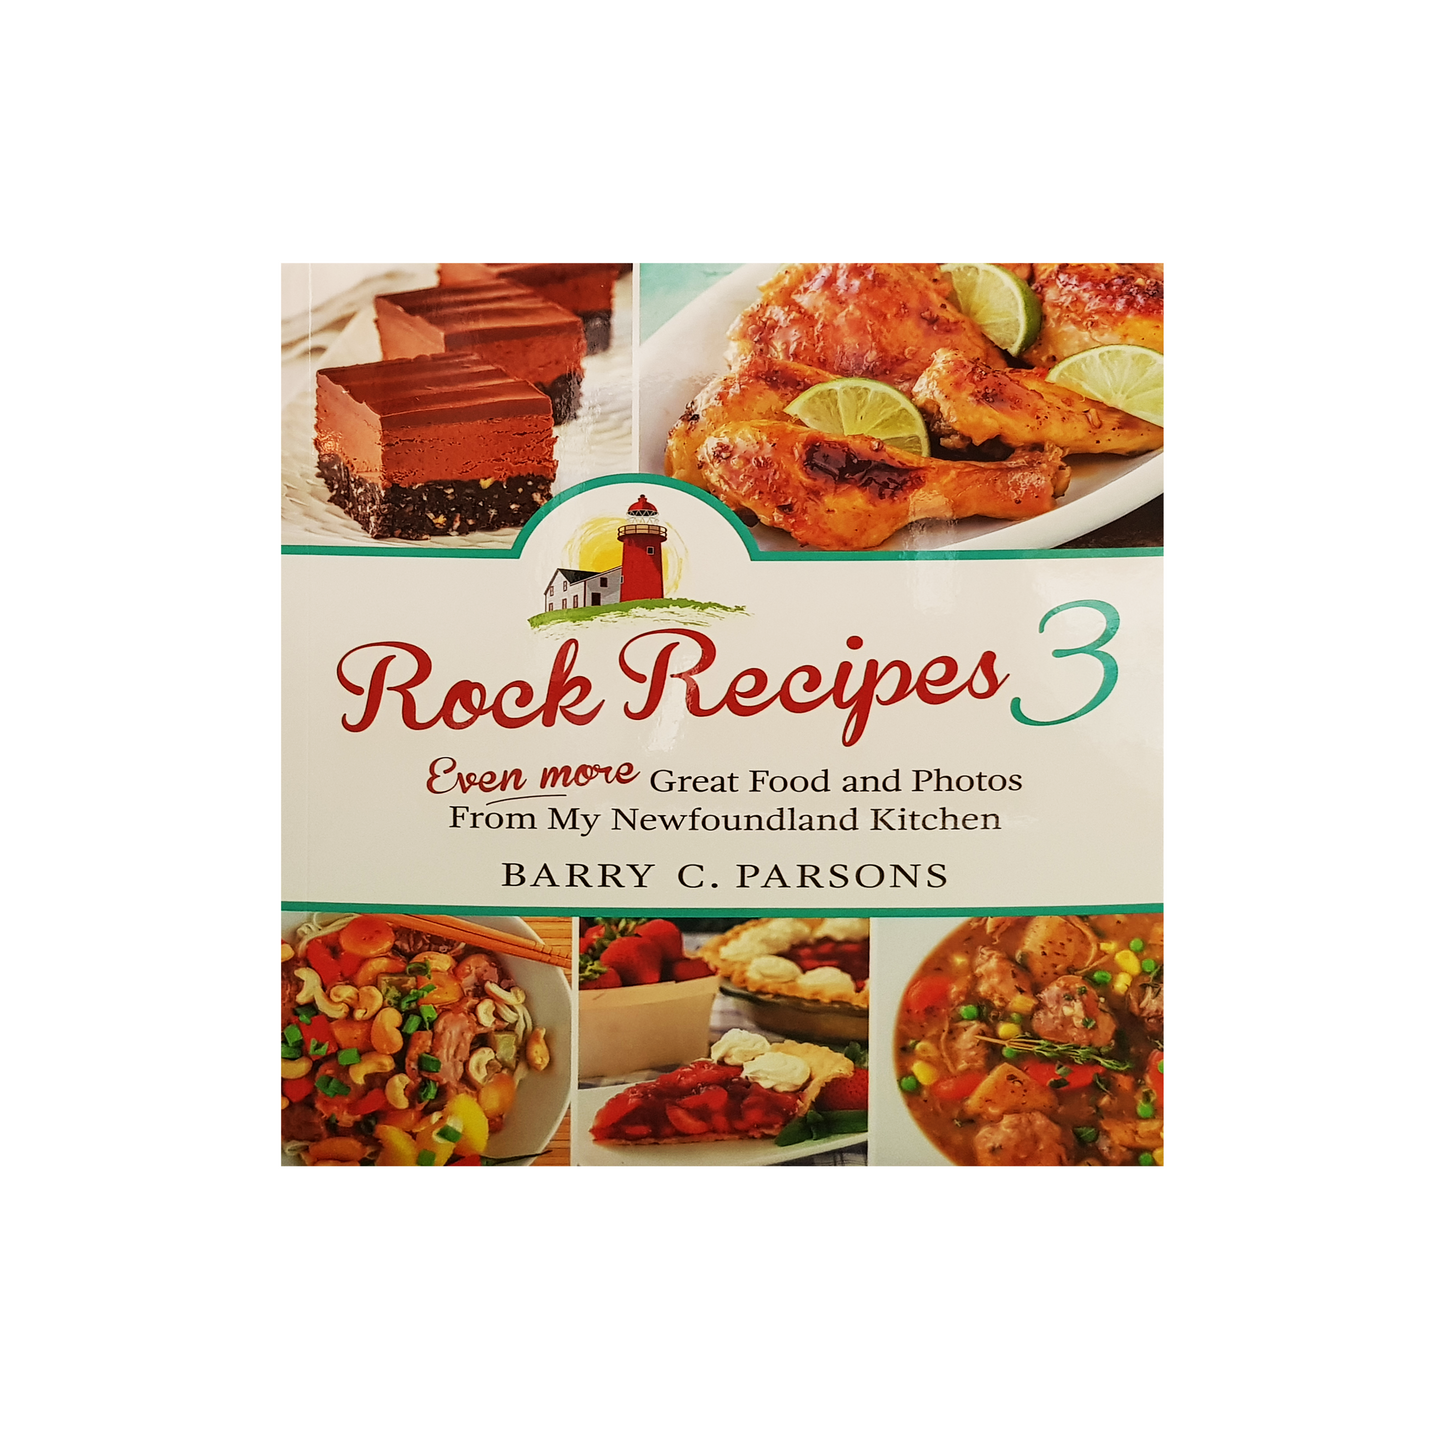 Rock Recipes 3 Even More Great Food and Photos